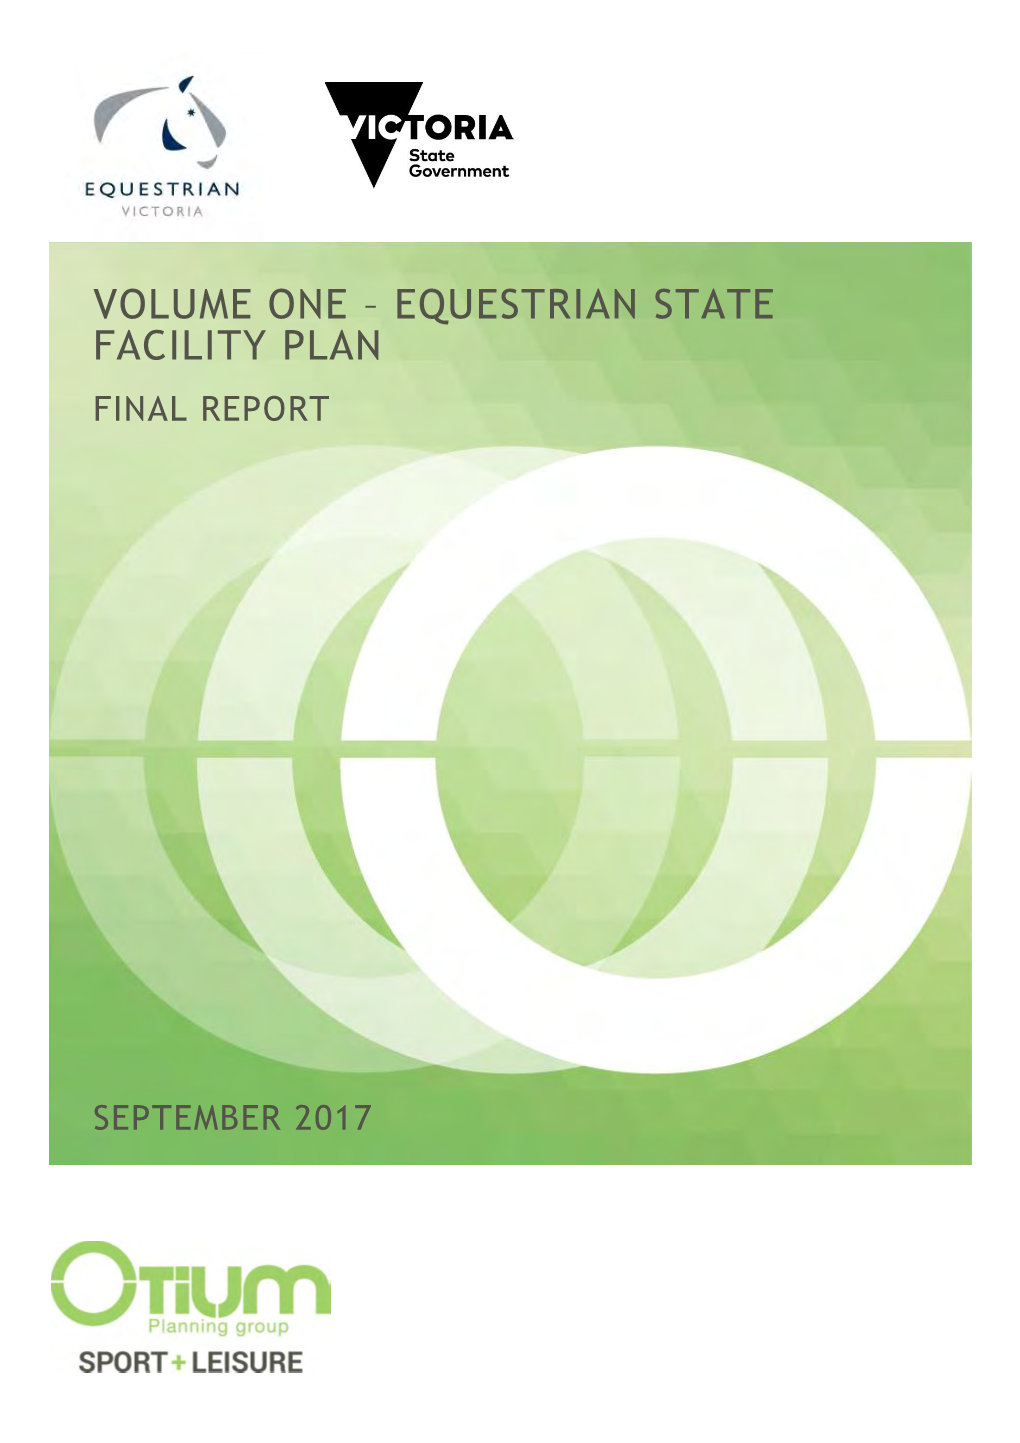 Equestrian State Facility Plan Final Report